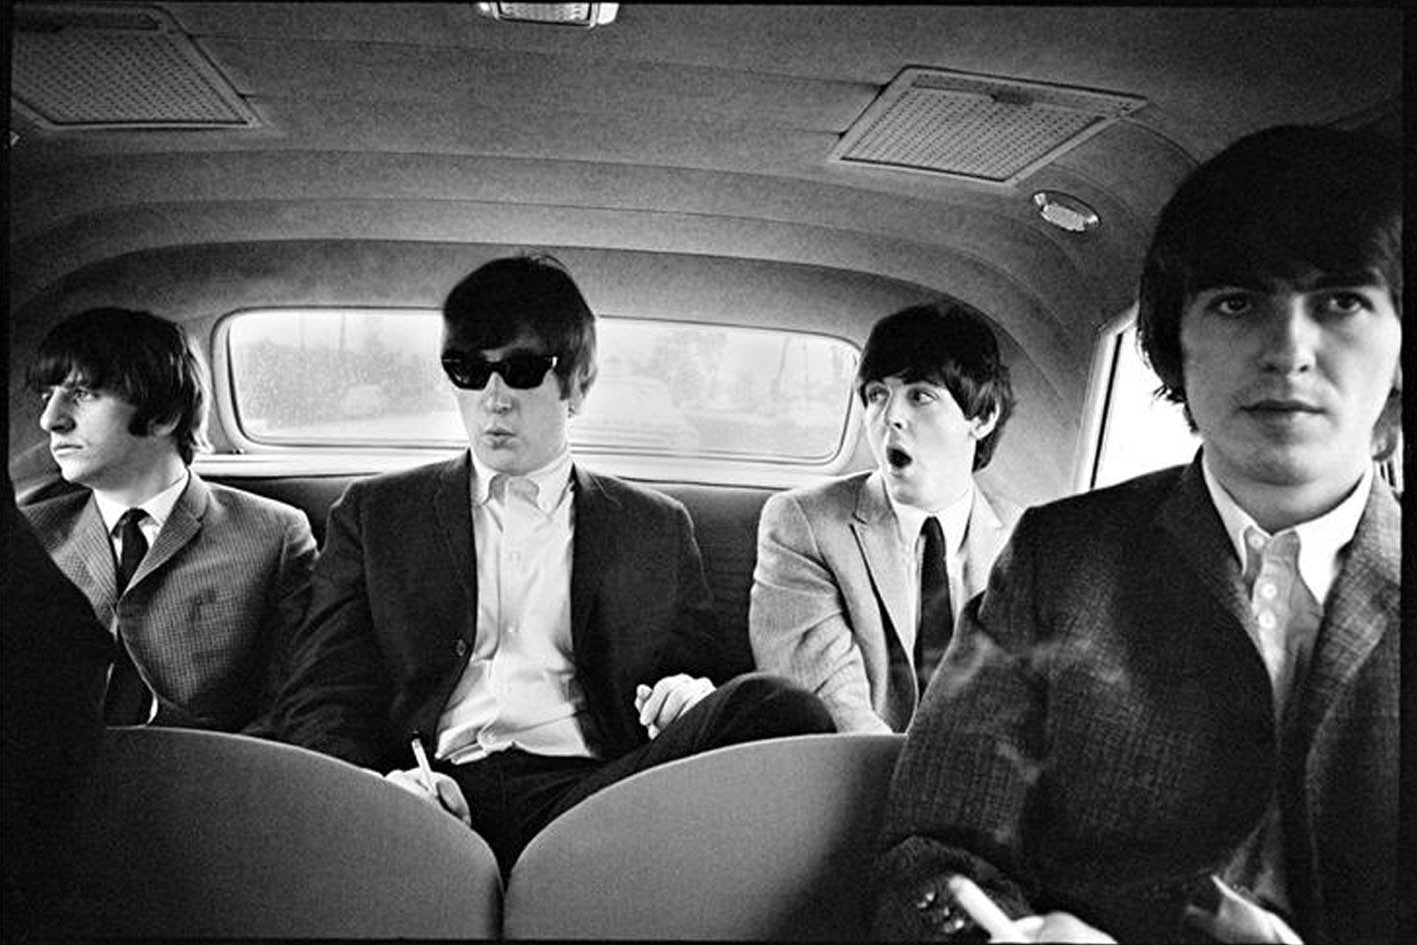 The Beatles in Limo, 1964 by Curt Gunther